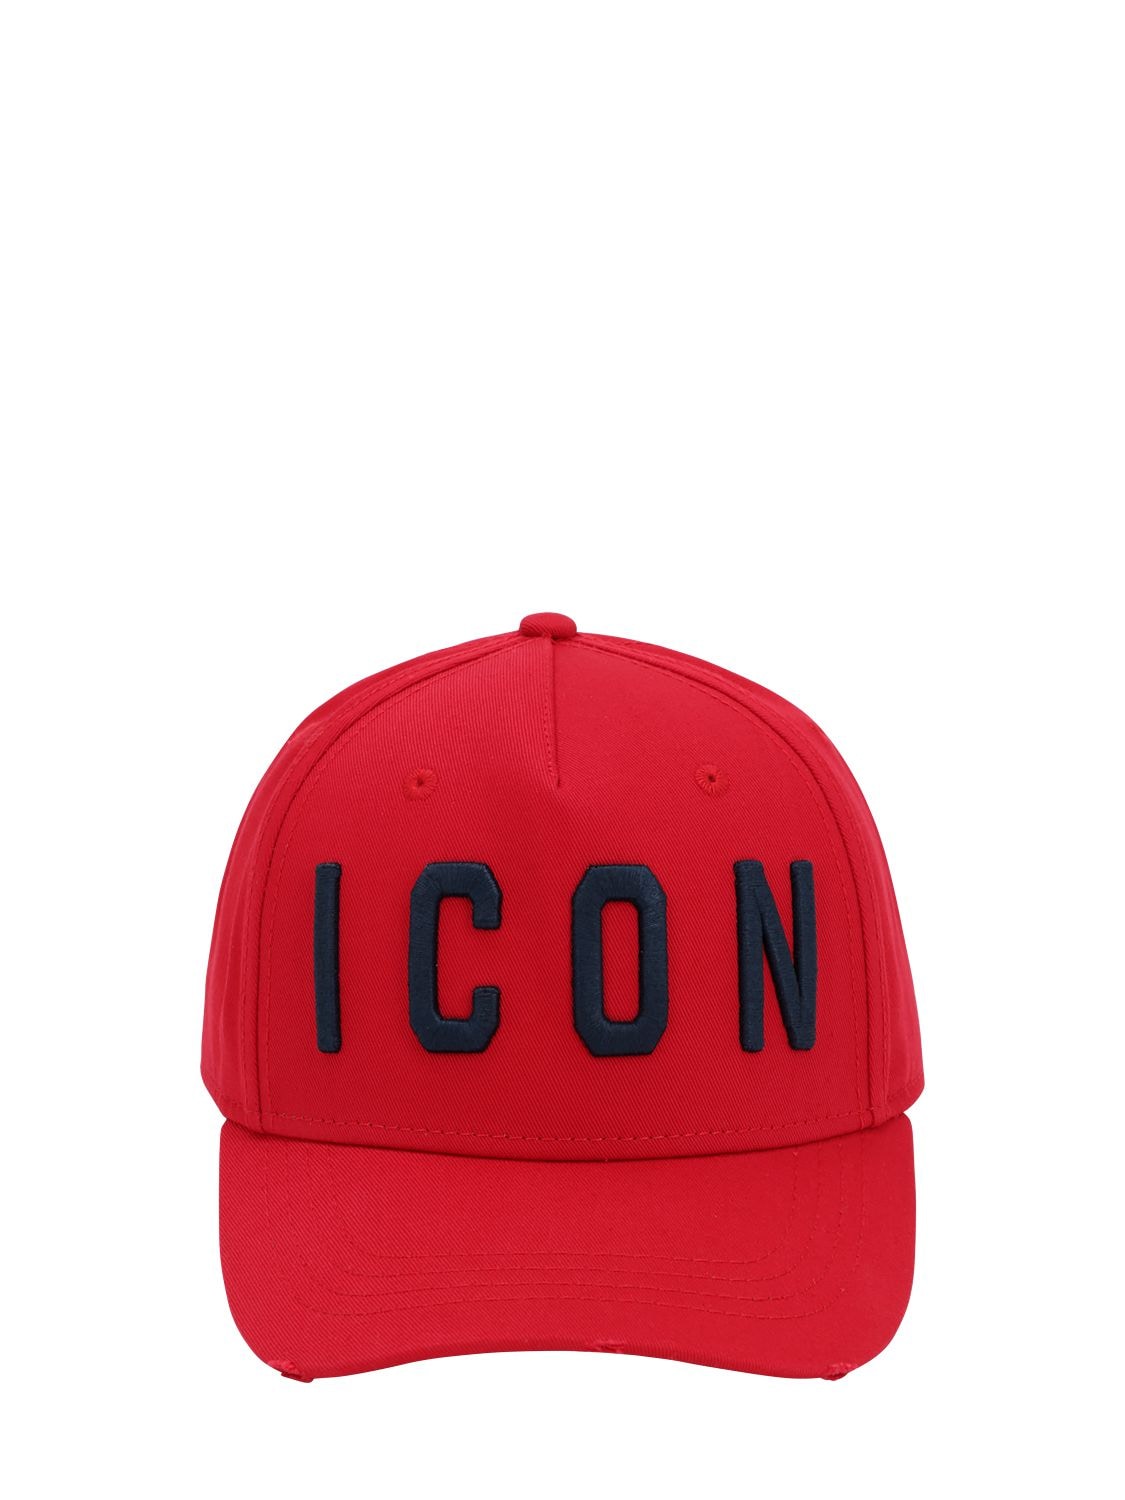 DSQUARED2 ICON COTTON CANVAS BASEBALL HAT,67IG7F004-TTE3NJY1